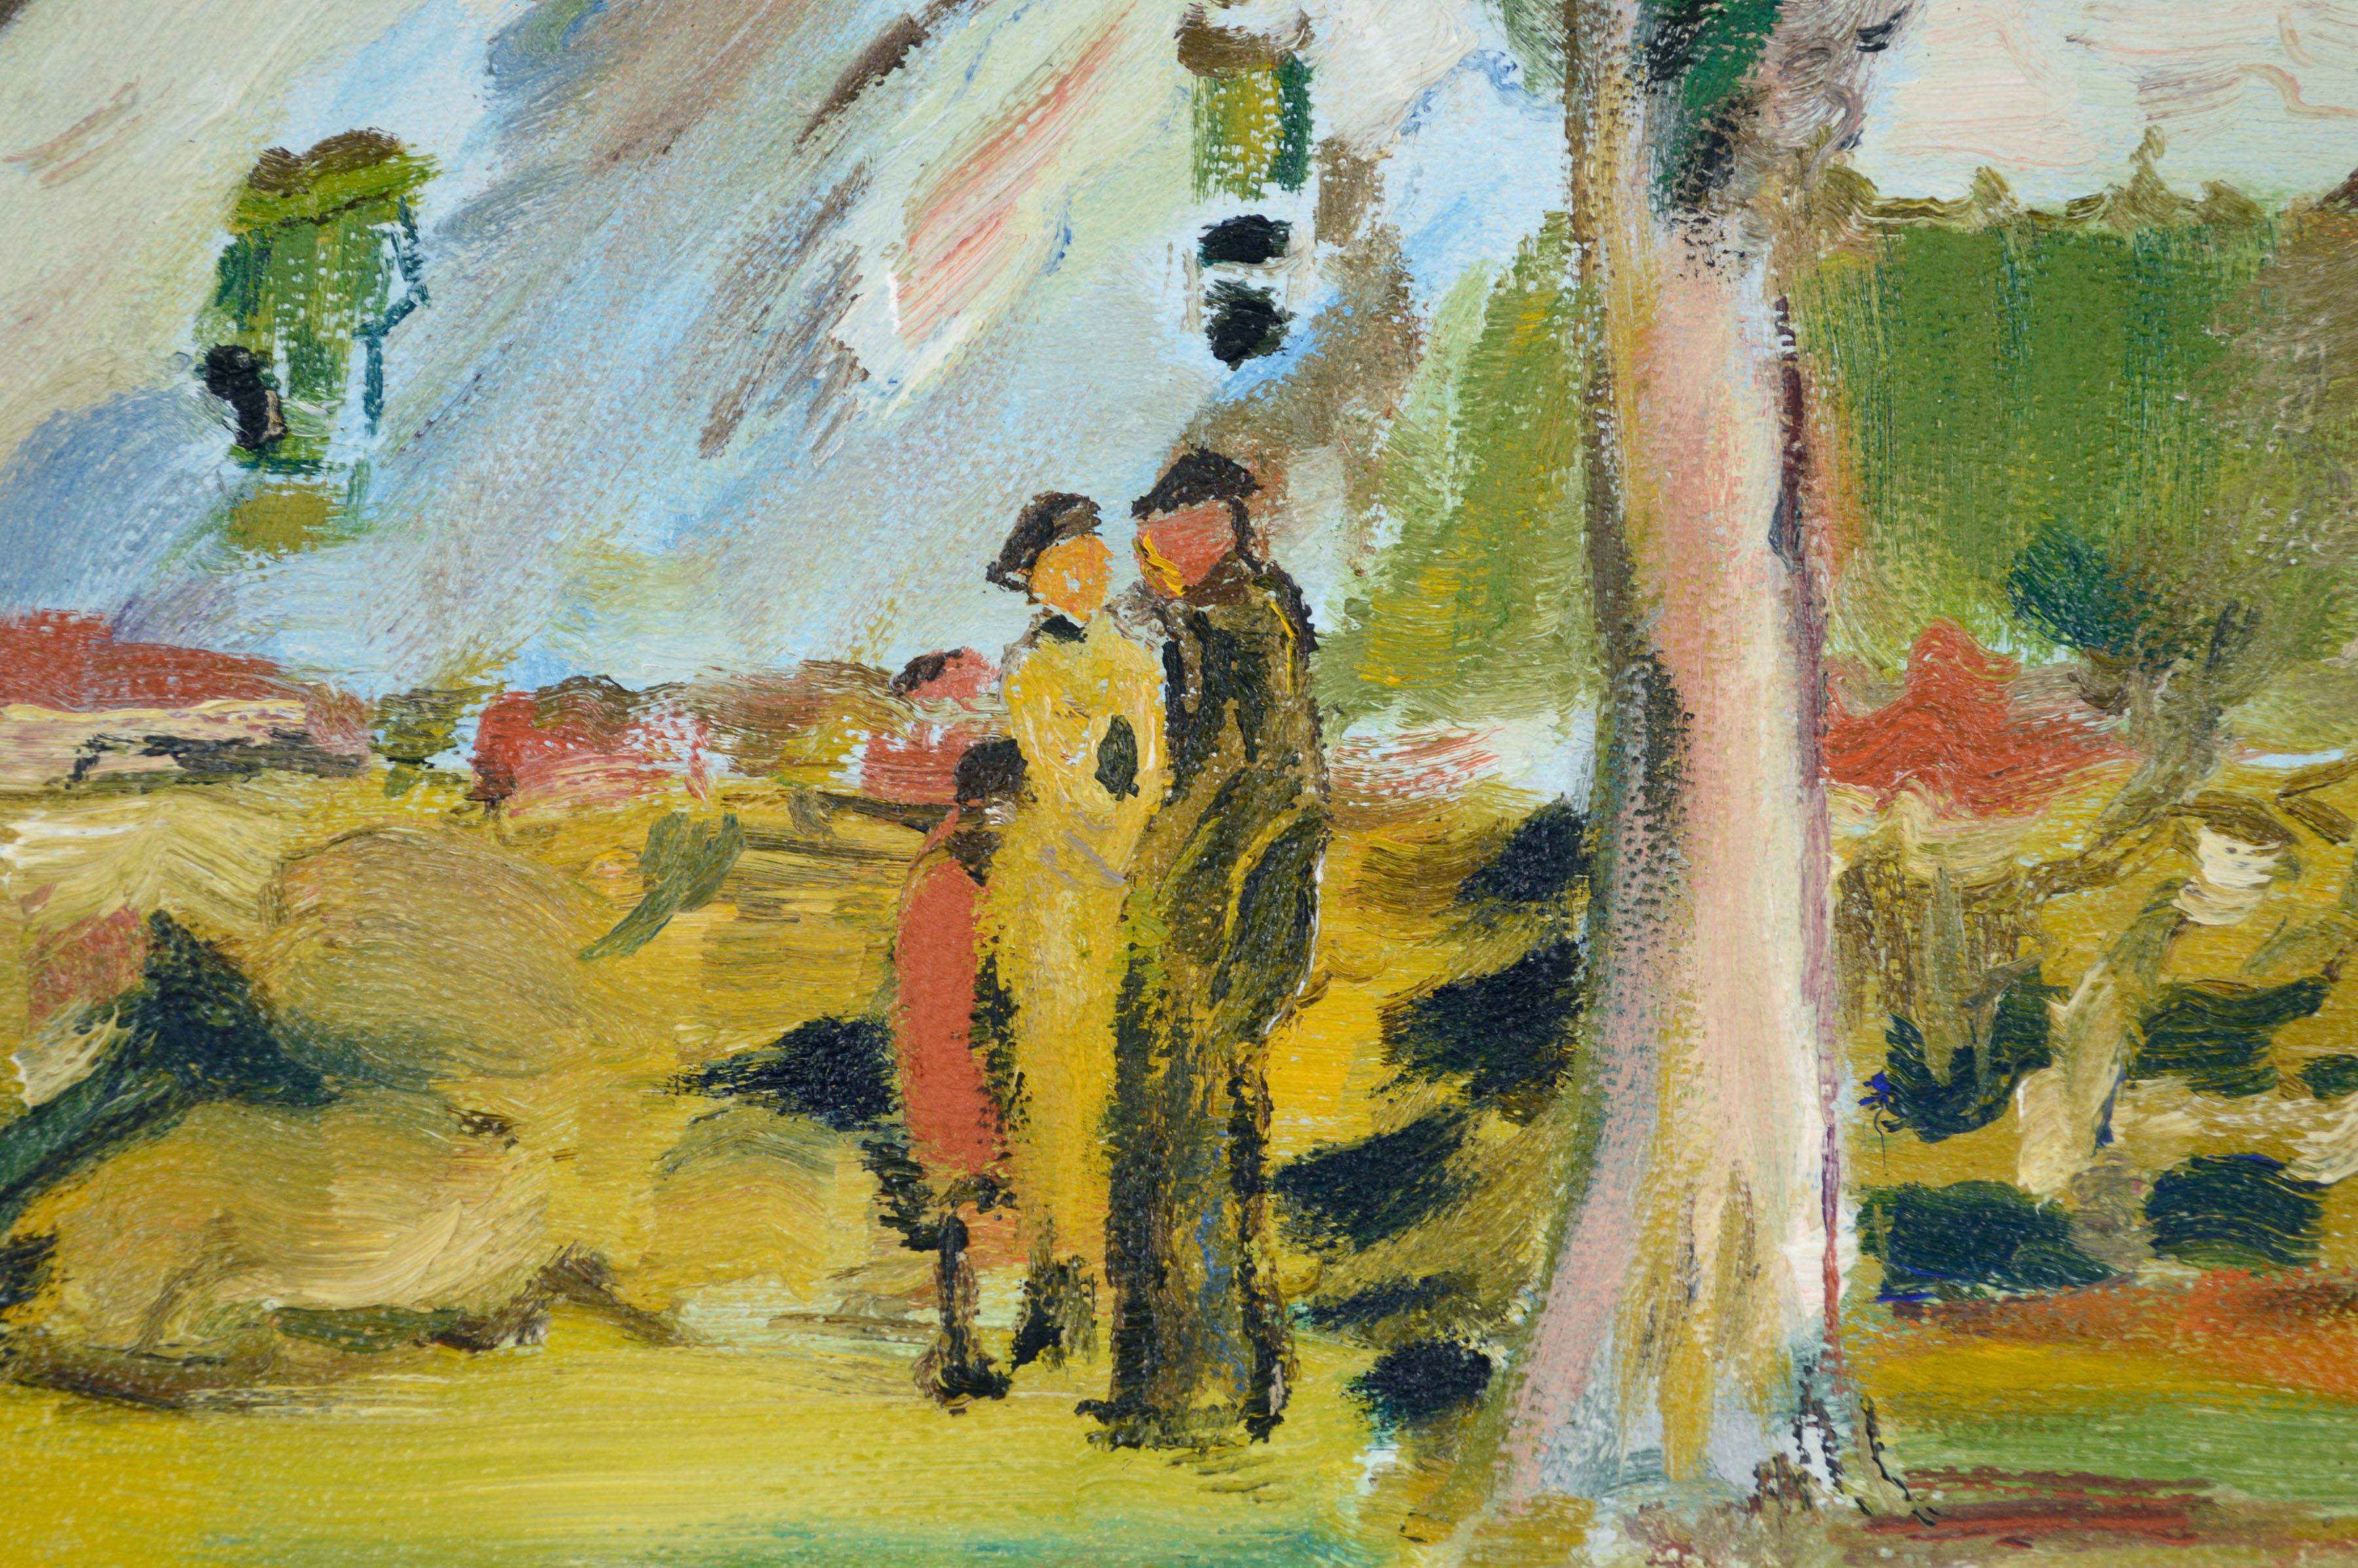 A vivid and expressive early 20th century modern figurative landscape with two small figures on a colorful street with tall trees and inviting houses, by an unknown artist, circa 1930's. In the style of Ted Kautzky. Unsigned. 

Displayed in a new